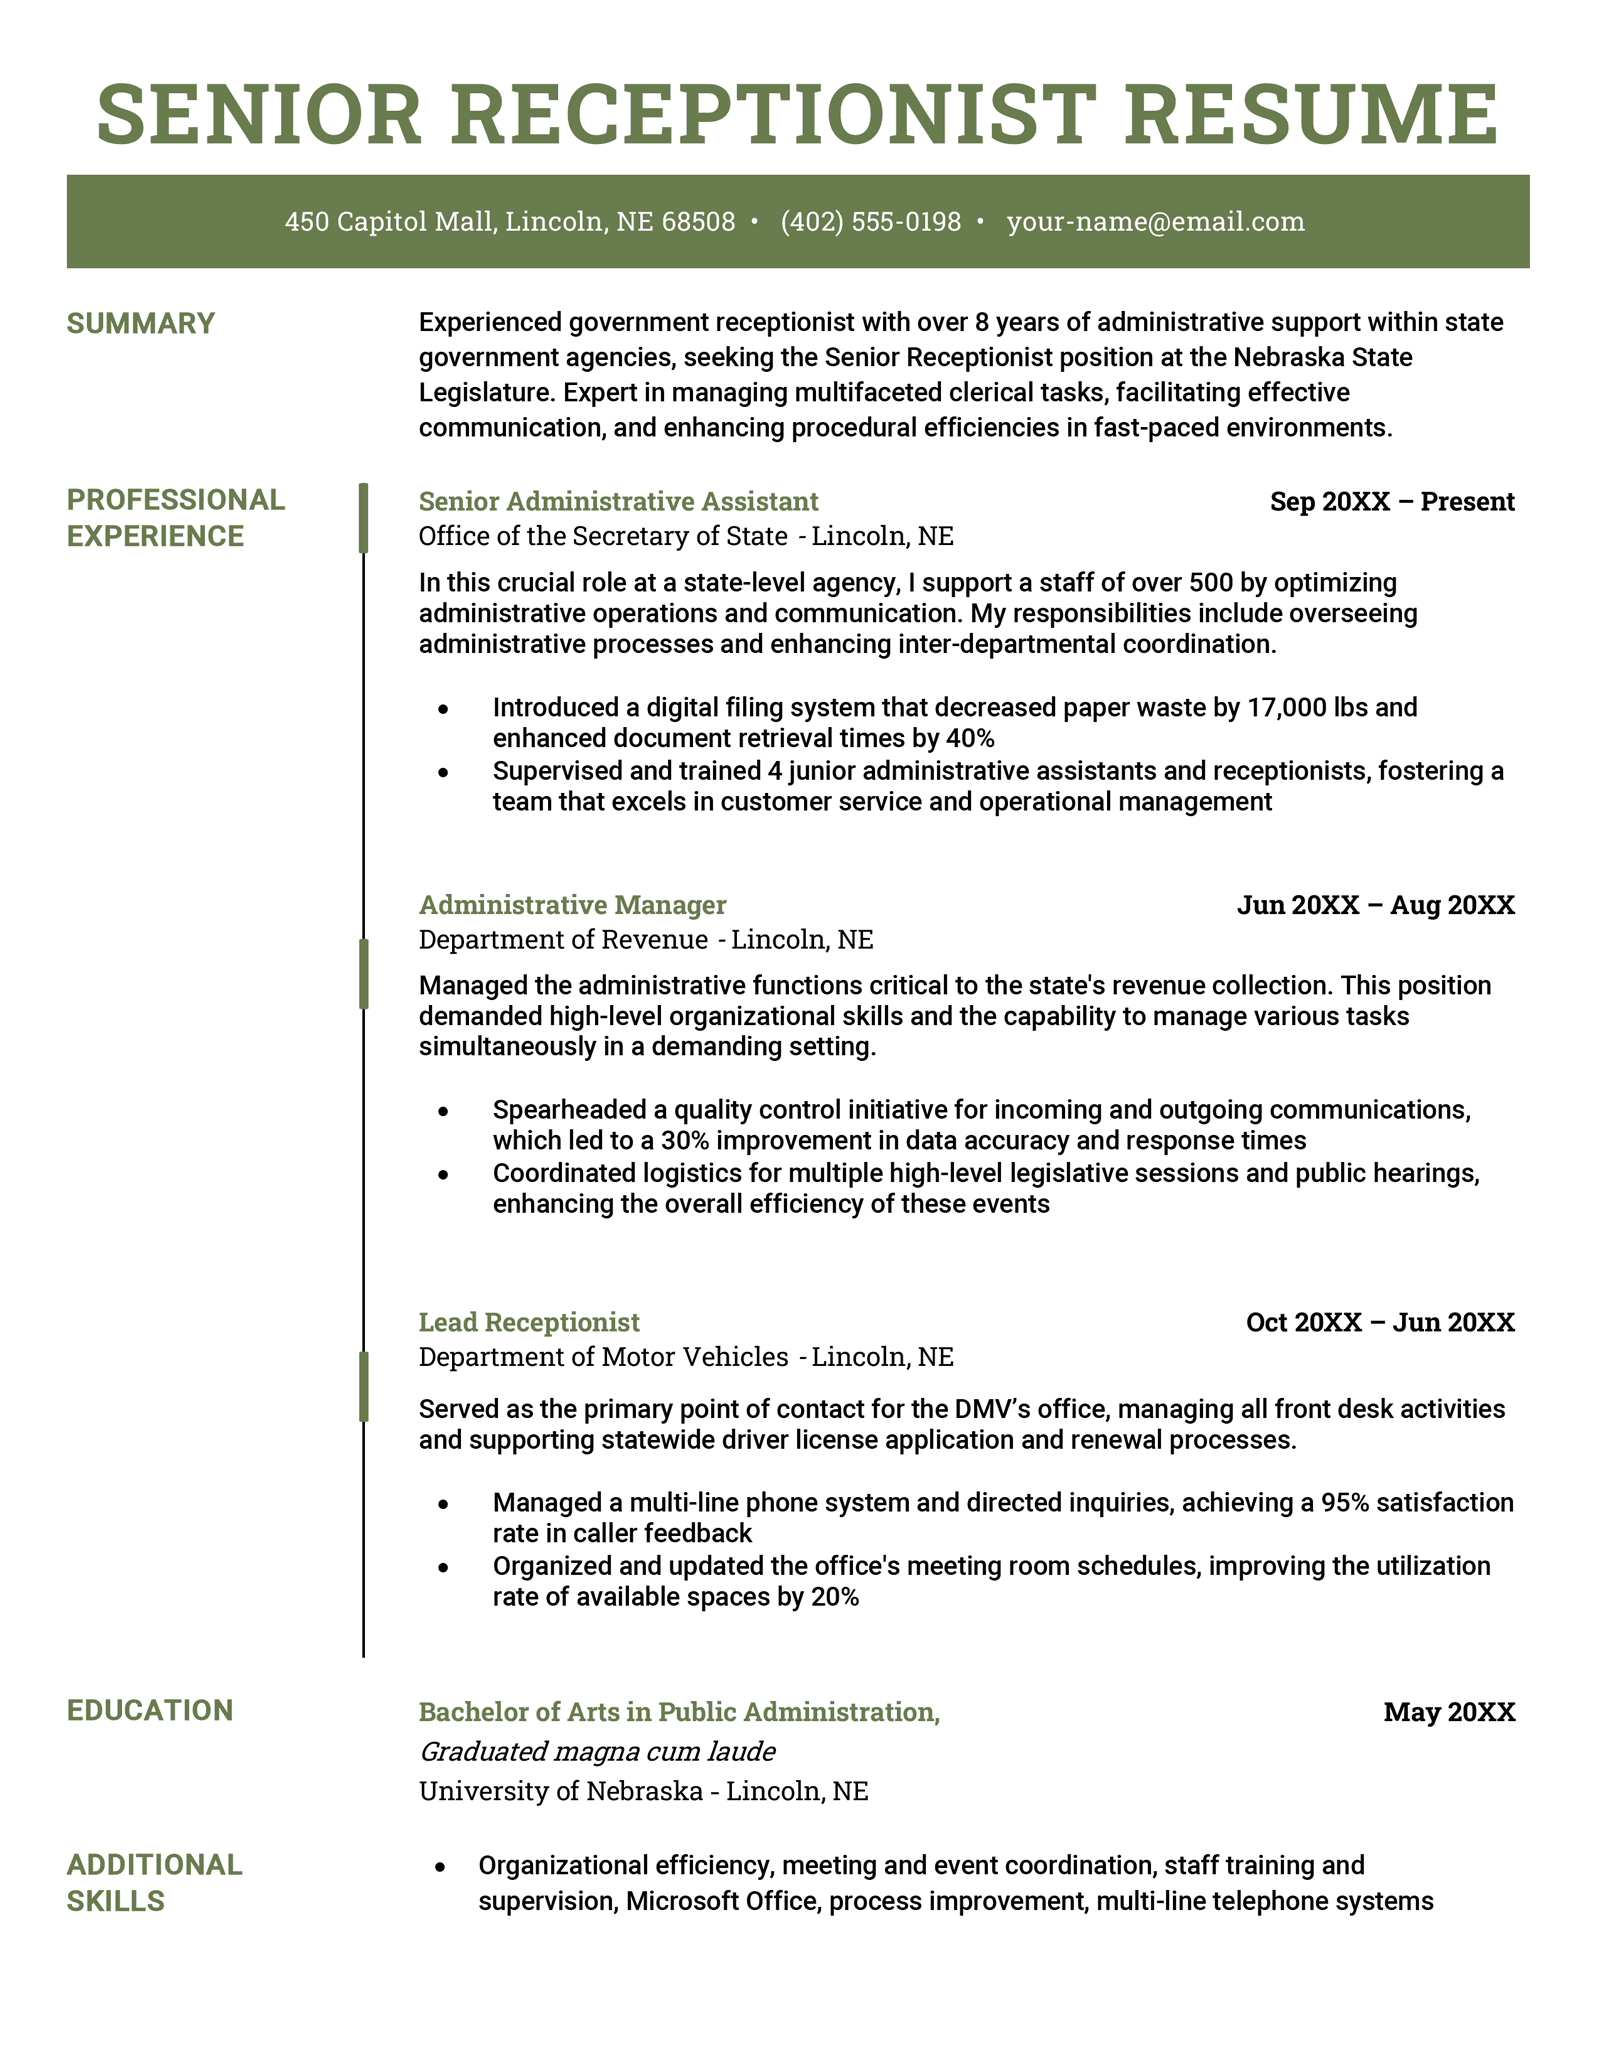 A green color scheme used for this senior receptionist resume example, showing the perfect balance of content and white space.